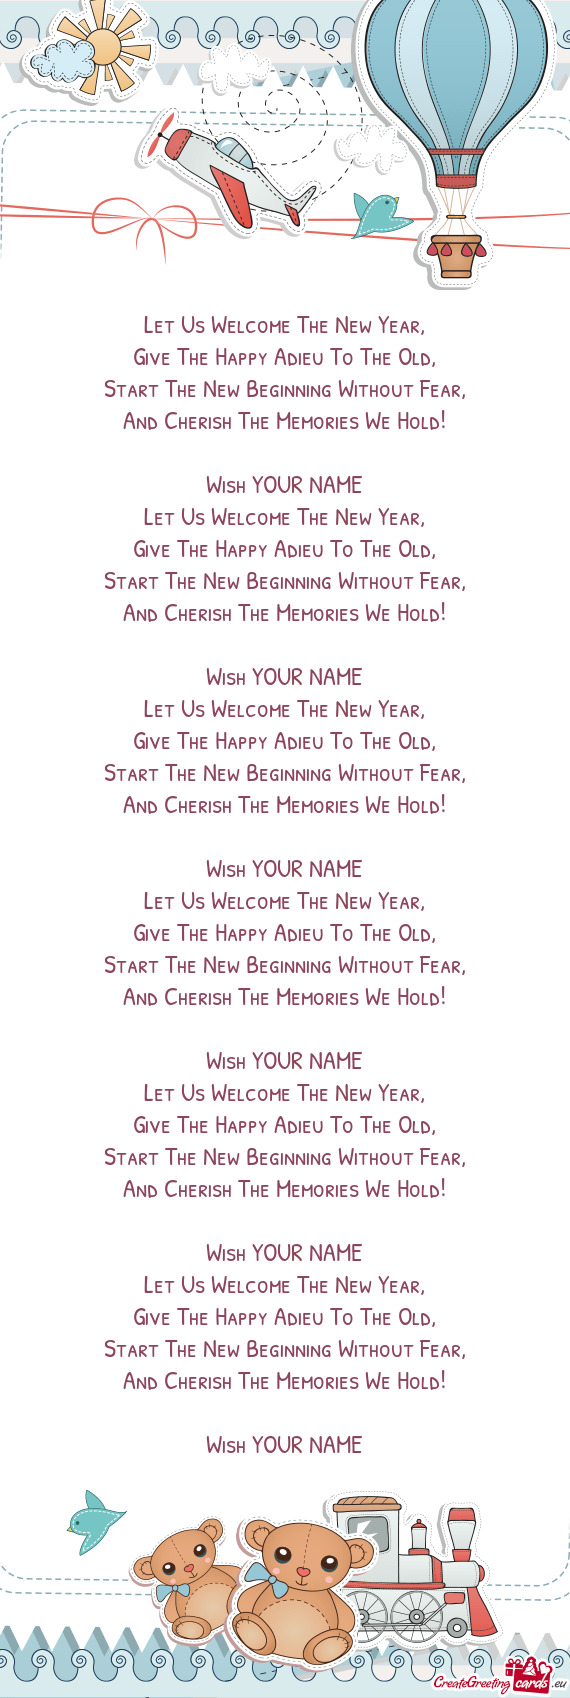 And Cherish The Memories We Hold!
 
 Wish YOUR NAME
 Let Us Welcome The New Year